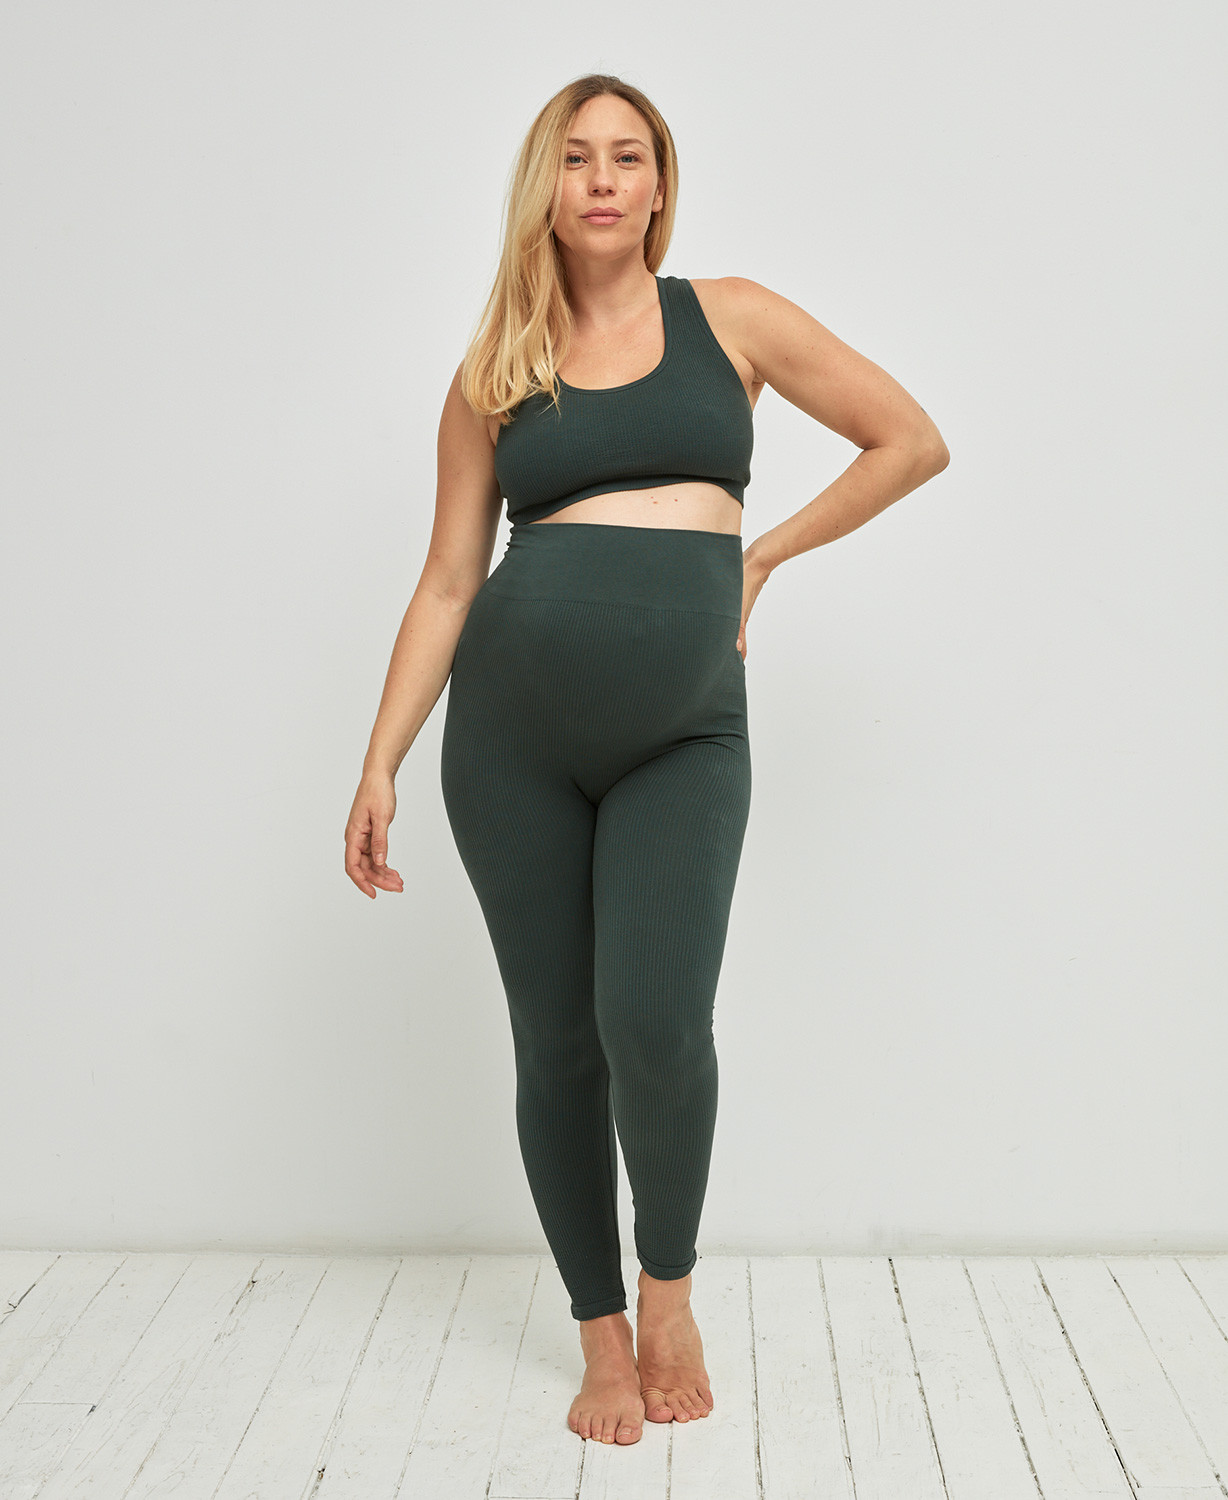 A premium seamless maternity band designed to hold up unbuttoned pants and  loose maternity wear, featuring a stay-put silicone strip.